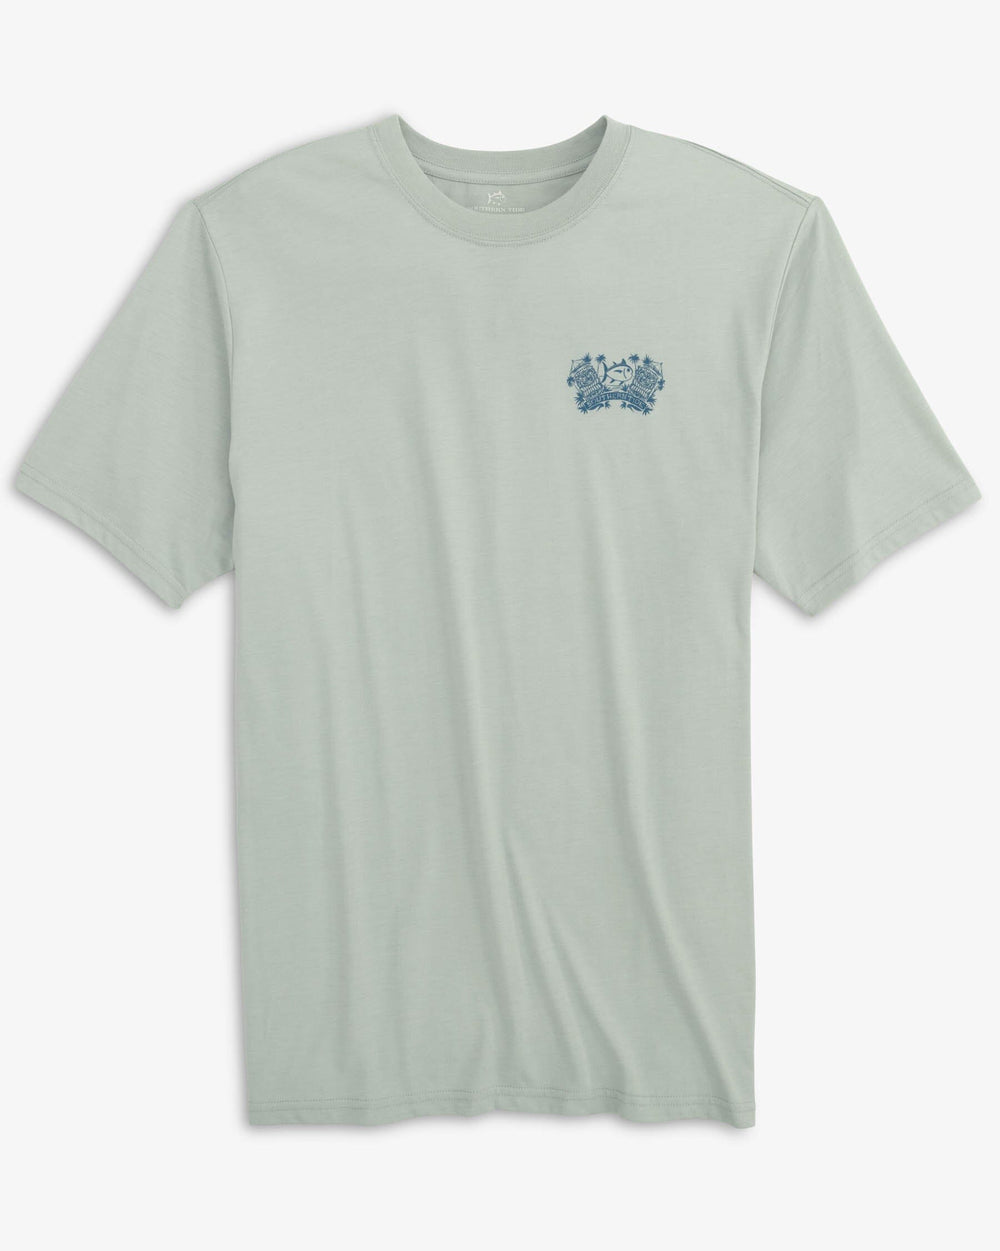 The front view of the Southern Tide Heather Meet Me at the Canteen T-Shirt by Southern Tide - Heather Slate Grey